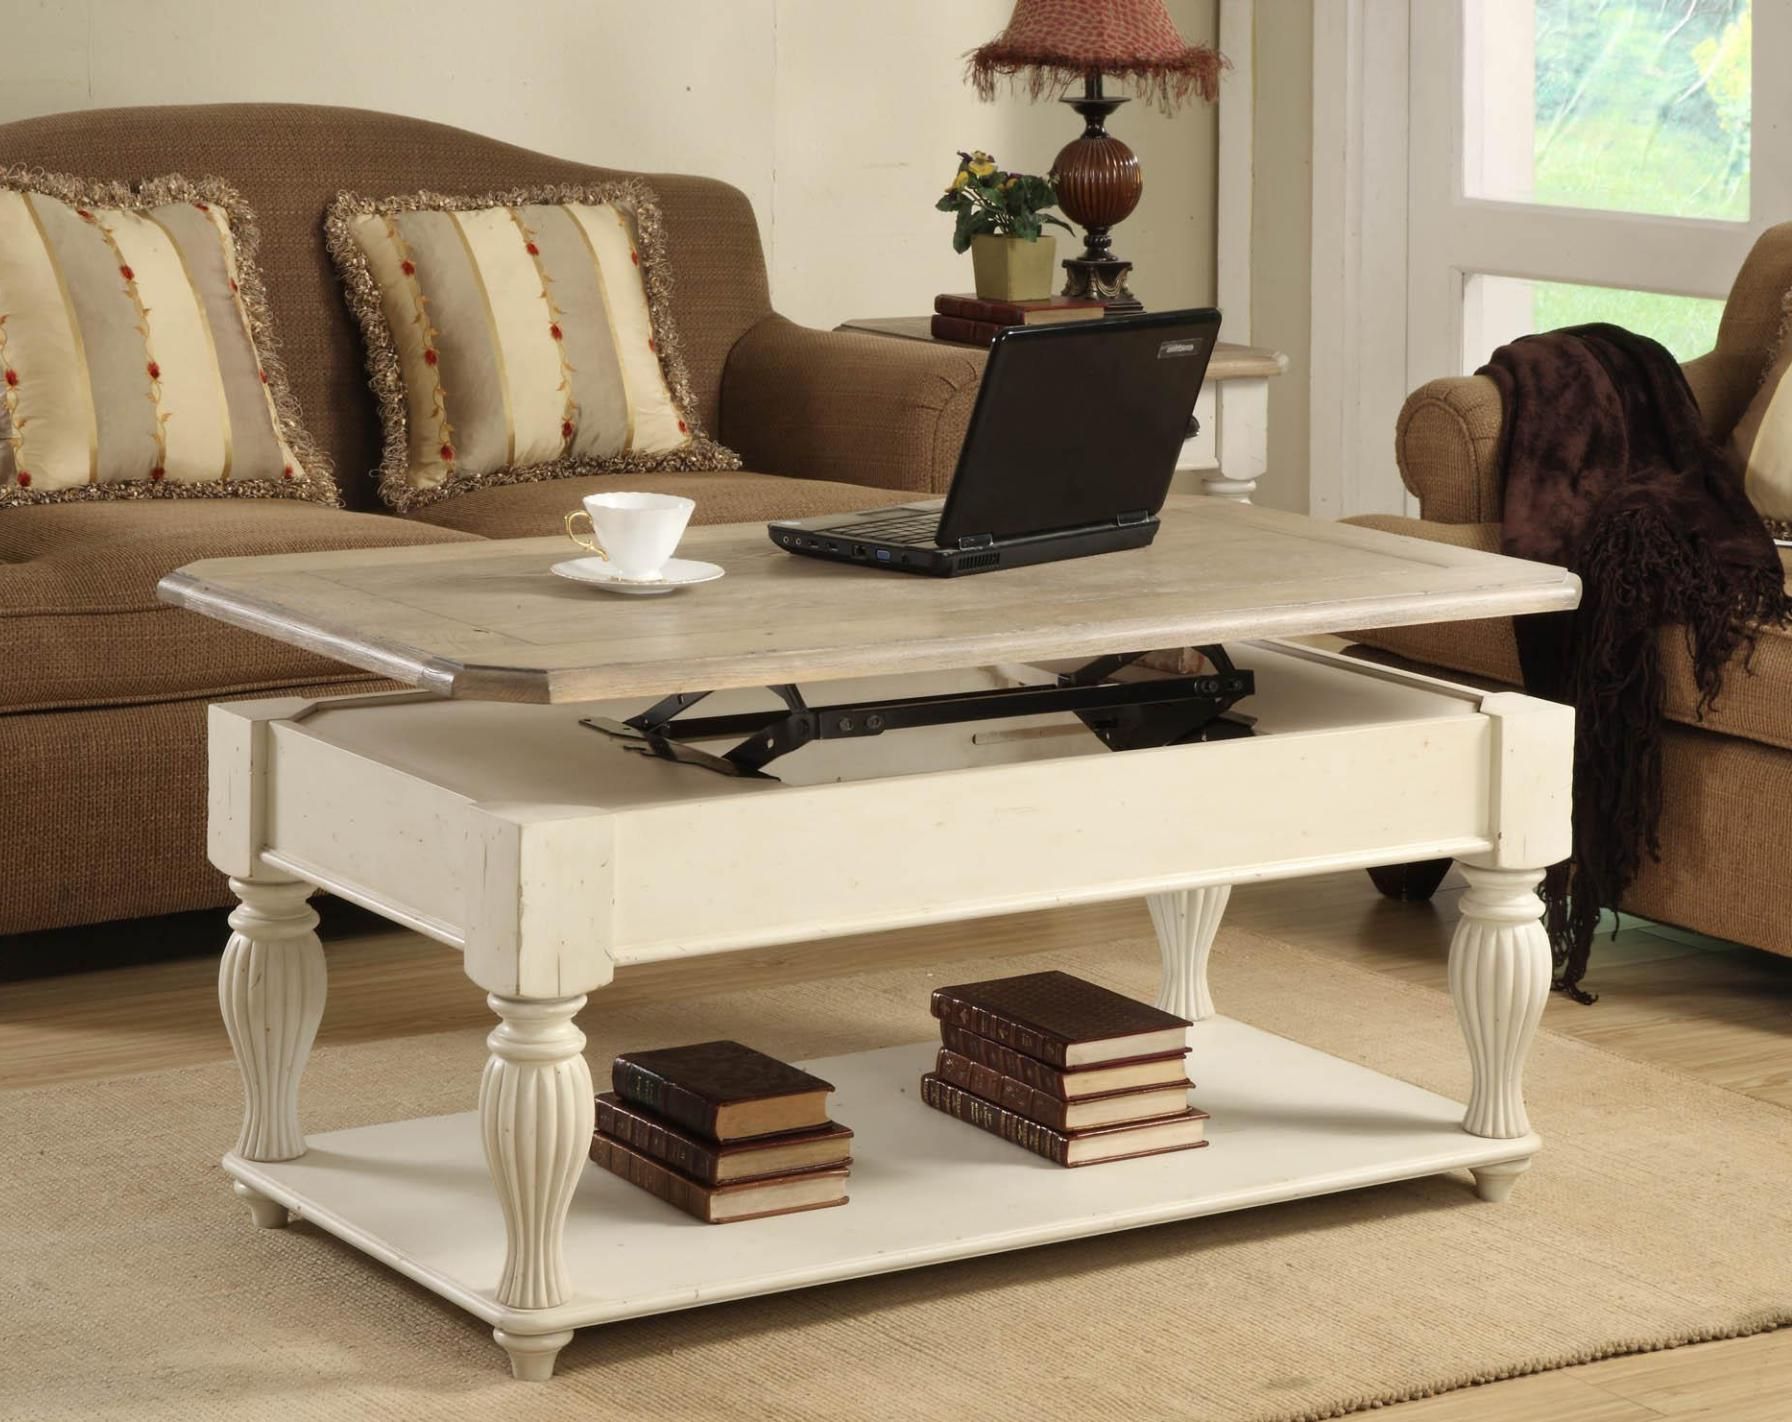 Lift Top Coffee Tables With Storage Within Lift Top Coffee Tables With Storage (View 13 of 20)